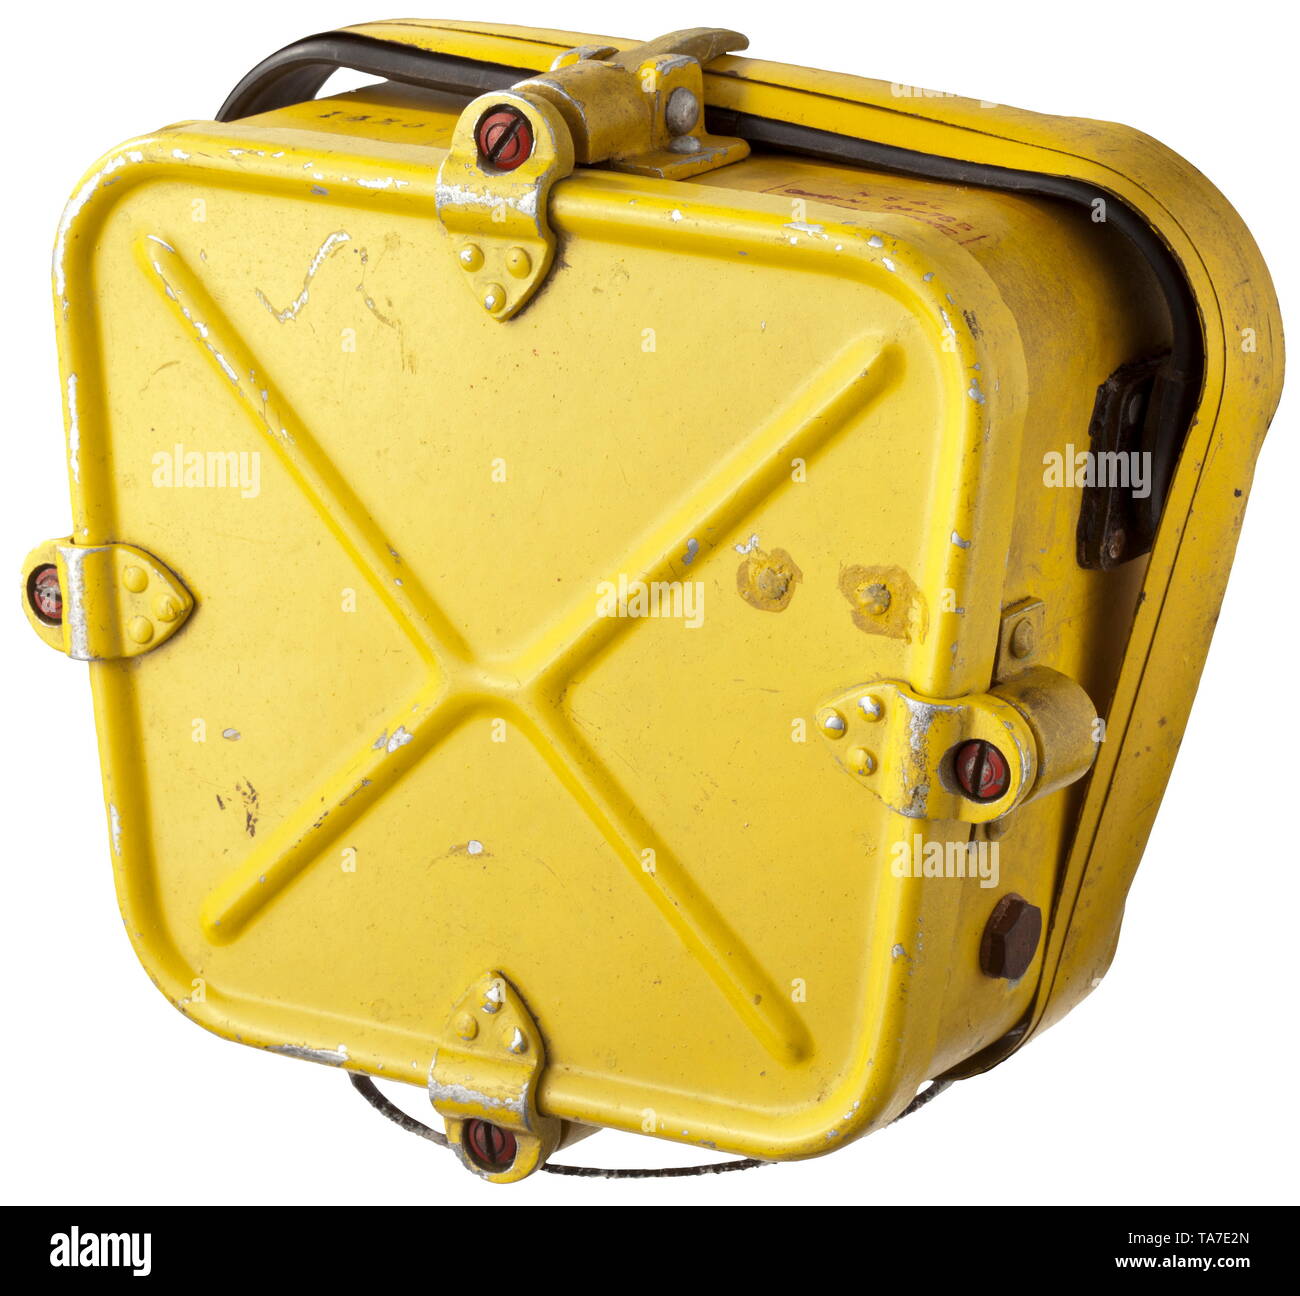 An emergency transmitter for maritime distress 'NS 4' for pilots of the fighter units Aluminium case, yellow lacquered, several fastening screws with red locking varnish seal. Case with mark 'NS 4 c - Gerät Nr. 124-78B - Anforderz. Ln28973' as well as number '1425(?)' on the side, with spring steel antenna wrapped around the case. Not checked for functionality or completeness. Dimensions of case circa 18 x 15 x 8 cm. Extraordinarily rare piece of equipment historic, historical, Air Force, branch of service, branches of service, armed service, armed services, military, milit, Editorial-Use-Only Stock Photo